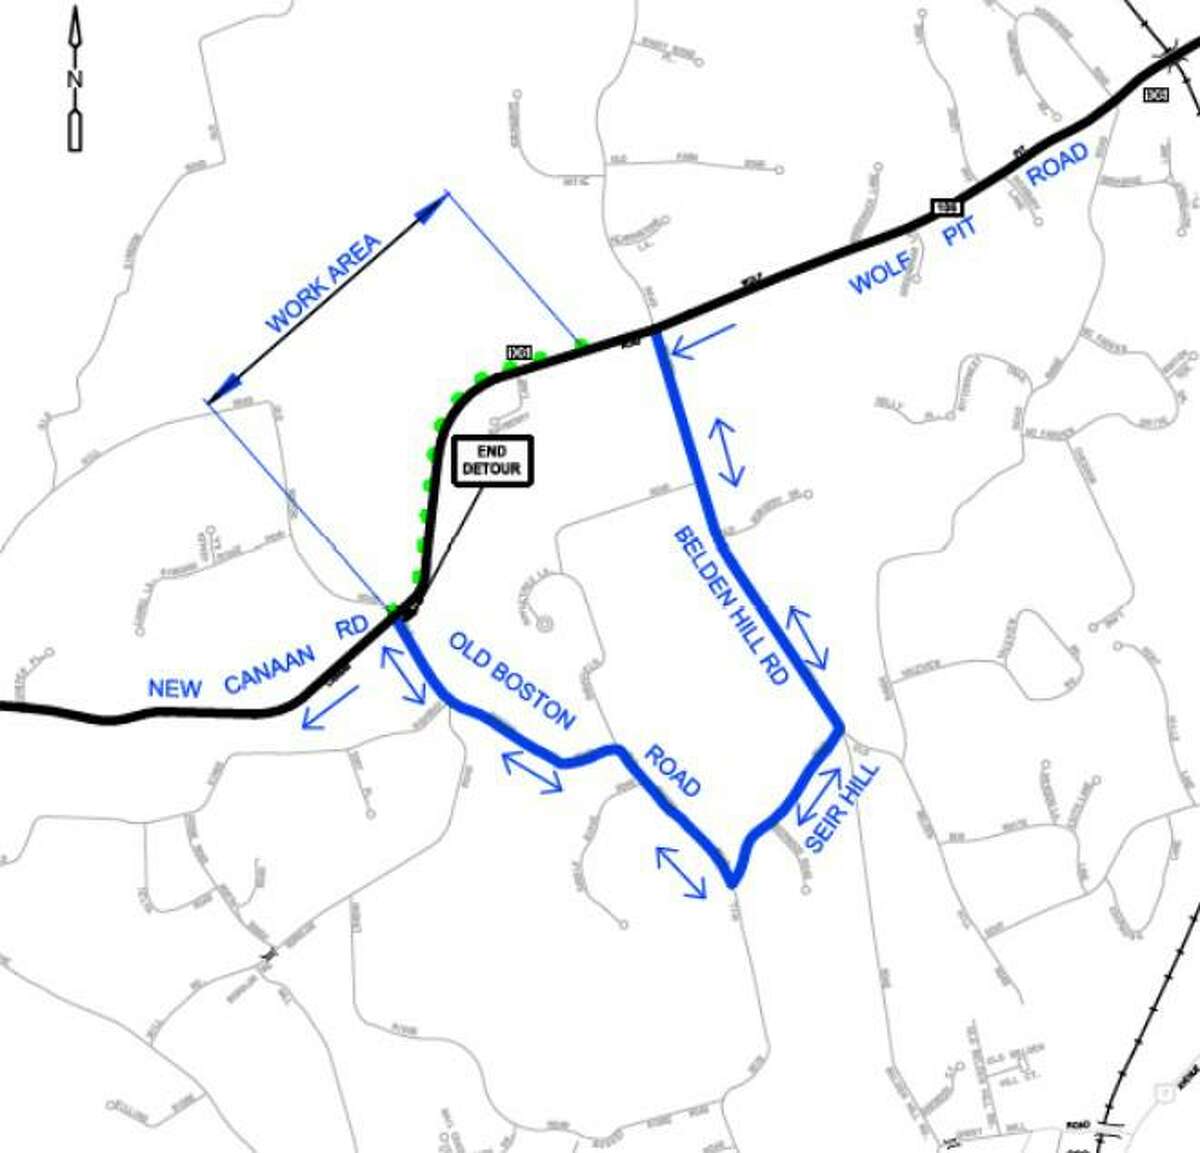 Detours for the project along Route 106 in Wilton.